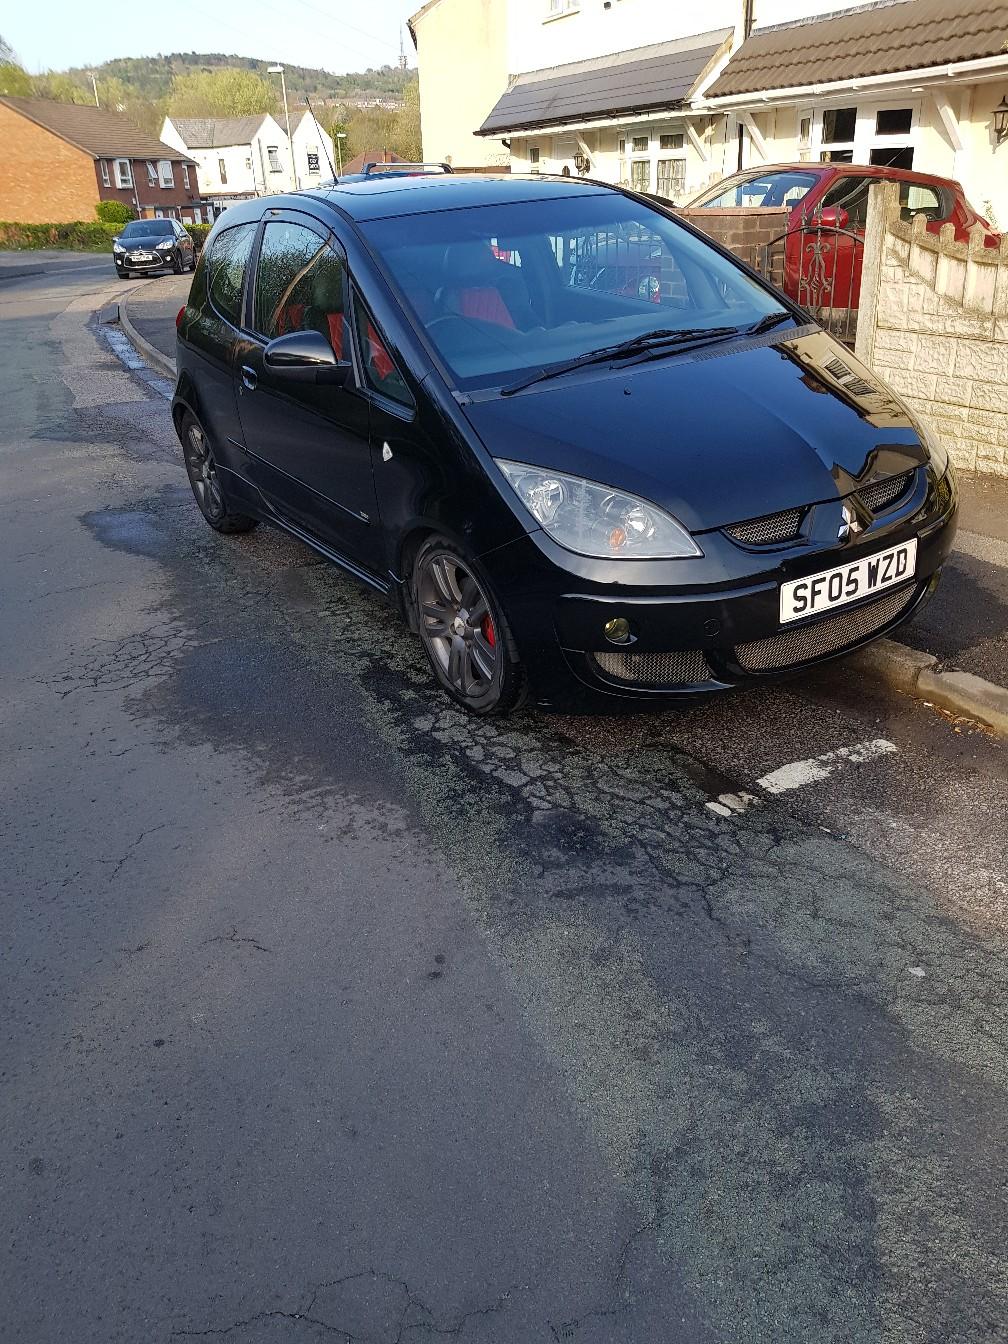 2005 mitsubishi colt czt turbo in Wyre Forest for £1,300